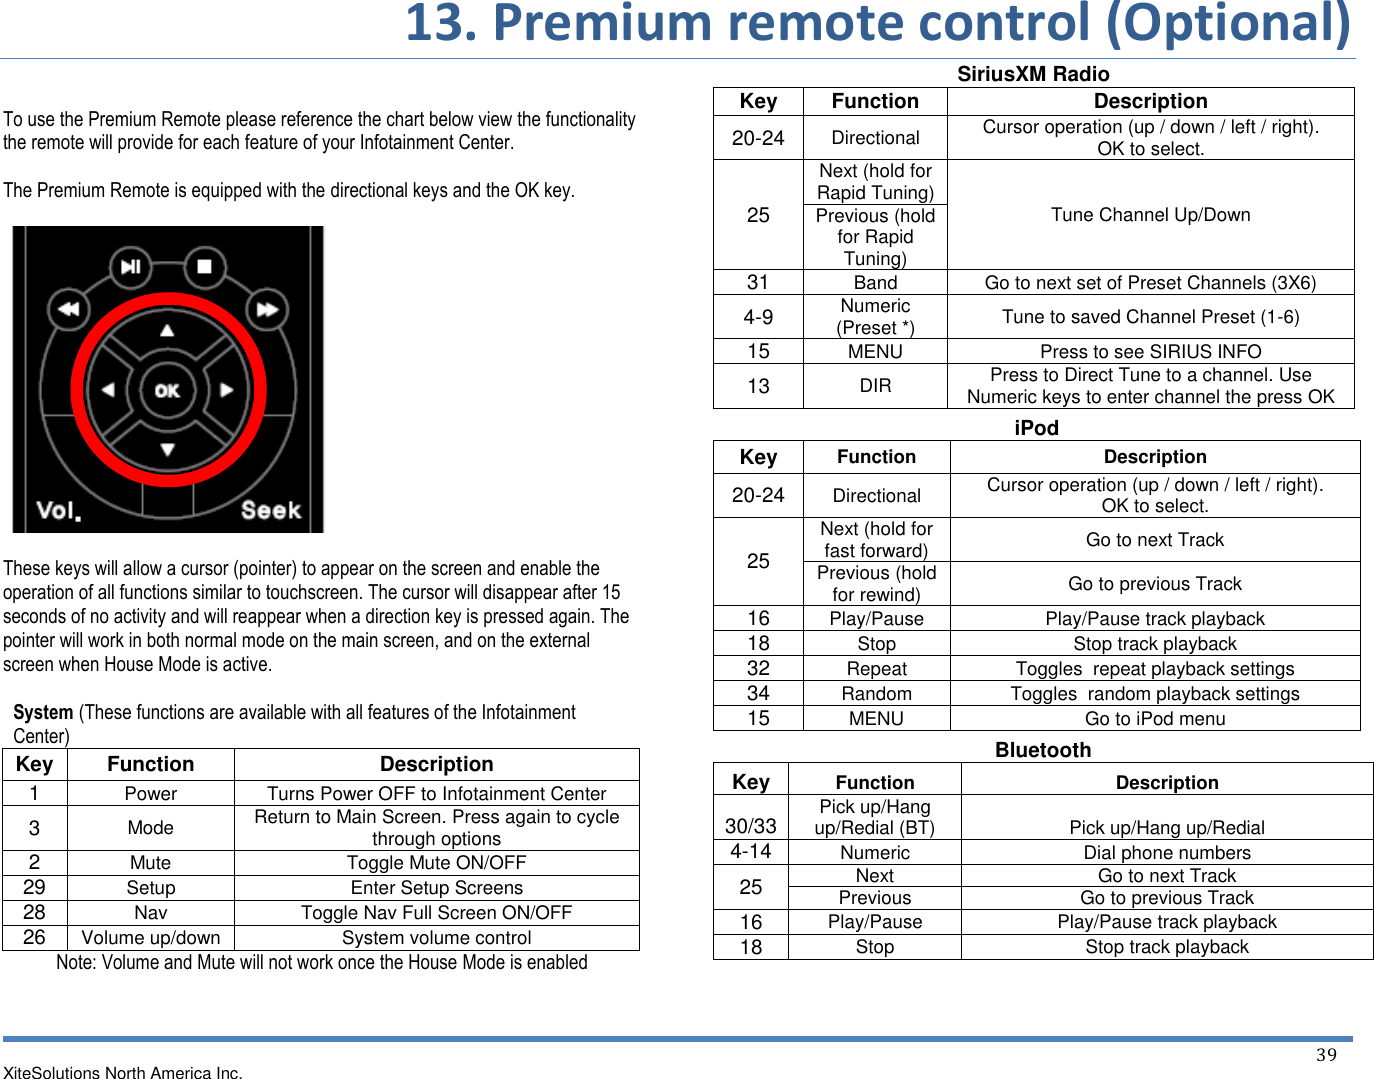       13. Premium remote control (Optional)   XiteSolutions North America Inc.    39   To use the Premium Remote please reference the chart below view the functionality the remote will provide for each feature of your Infotainment Center.  The Premium Remote is equipped with the directional keys and the OK key.    These keys will allow a cursor (pointer) to appear on the screen and enable the operation of all functions similar to touchscreen. The cursor will disappear after 15 seconds of no activity and will reappear when a direction key is pressed again. The pointer will work in both normal mode on the main screen, and on the external screen when House Mode is active.  System (These functions are available with all features of the Infotainment Center) Key Function Description 1 Power Turns Power OFF to Infotainment Center 3 Mode Return to Main Screen. Press again to cycle through options 2 Mute Toggle Mute ON/OFF 29 Setup Enter Setup Screens 28 Nav Toggle Nav Full Screen ON/OFF 26 Volume up/down System volume control Note: Volume and Mute will not work once the House Mode is enabled  SiriusXM Radio Key Function Description 20-24 Directional Cursor operation (up / down / left / right). OK to select. 25 Next (hold for Rapid Tuning) Tune Channel Up/Down Previous (hold for Rapid Tuning) 31 Band Go to next set of Preset Channels (3X6) 4-9 Numeric  (Preset *) Tune to saved Channel Preset (1-6) 15 MENU Press to see SIRIUS INFO 13 DIR Press to Direct Tune to a channel. Use Numeric keys to enter channel the press OK iPod Key Function Description 20-24 Directional Cursor operation (up / down / left / right). OK to select. 25 Next (hold for fast forward) Go to next Track Previous (hold for rewind) Go to previous Track 16 Play/Pause Play/Pause track playback 18 Stop Stop track playback 32 Repeat Toggles  repeat playback settings 34 Random Toggles  random playback settings 15 MENU Go to iPod menu Bluetooth Key Function Description 30/33 Pick up/Hang up/Redial (BT) Pick up/Hang up/Redial 4-14 Numeric Dial phone numbers 25 Next Go to next Track Previous Go to previous Track 16 Play/Pause Play/Pause track playback 18 Stop Stop track playback   